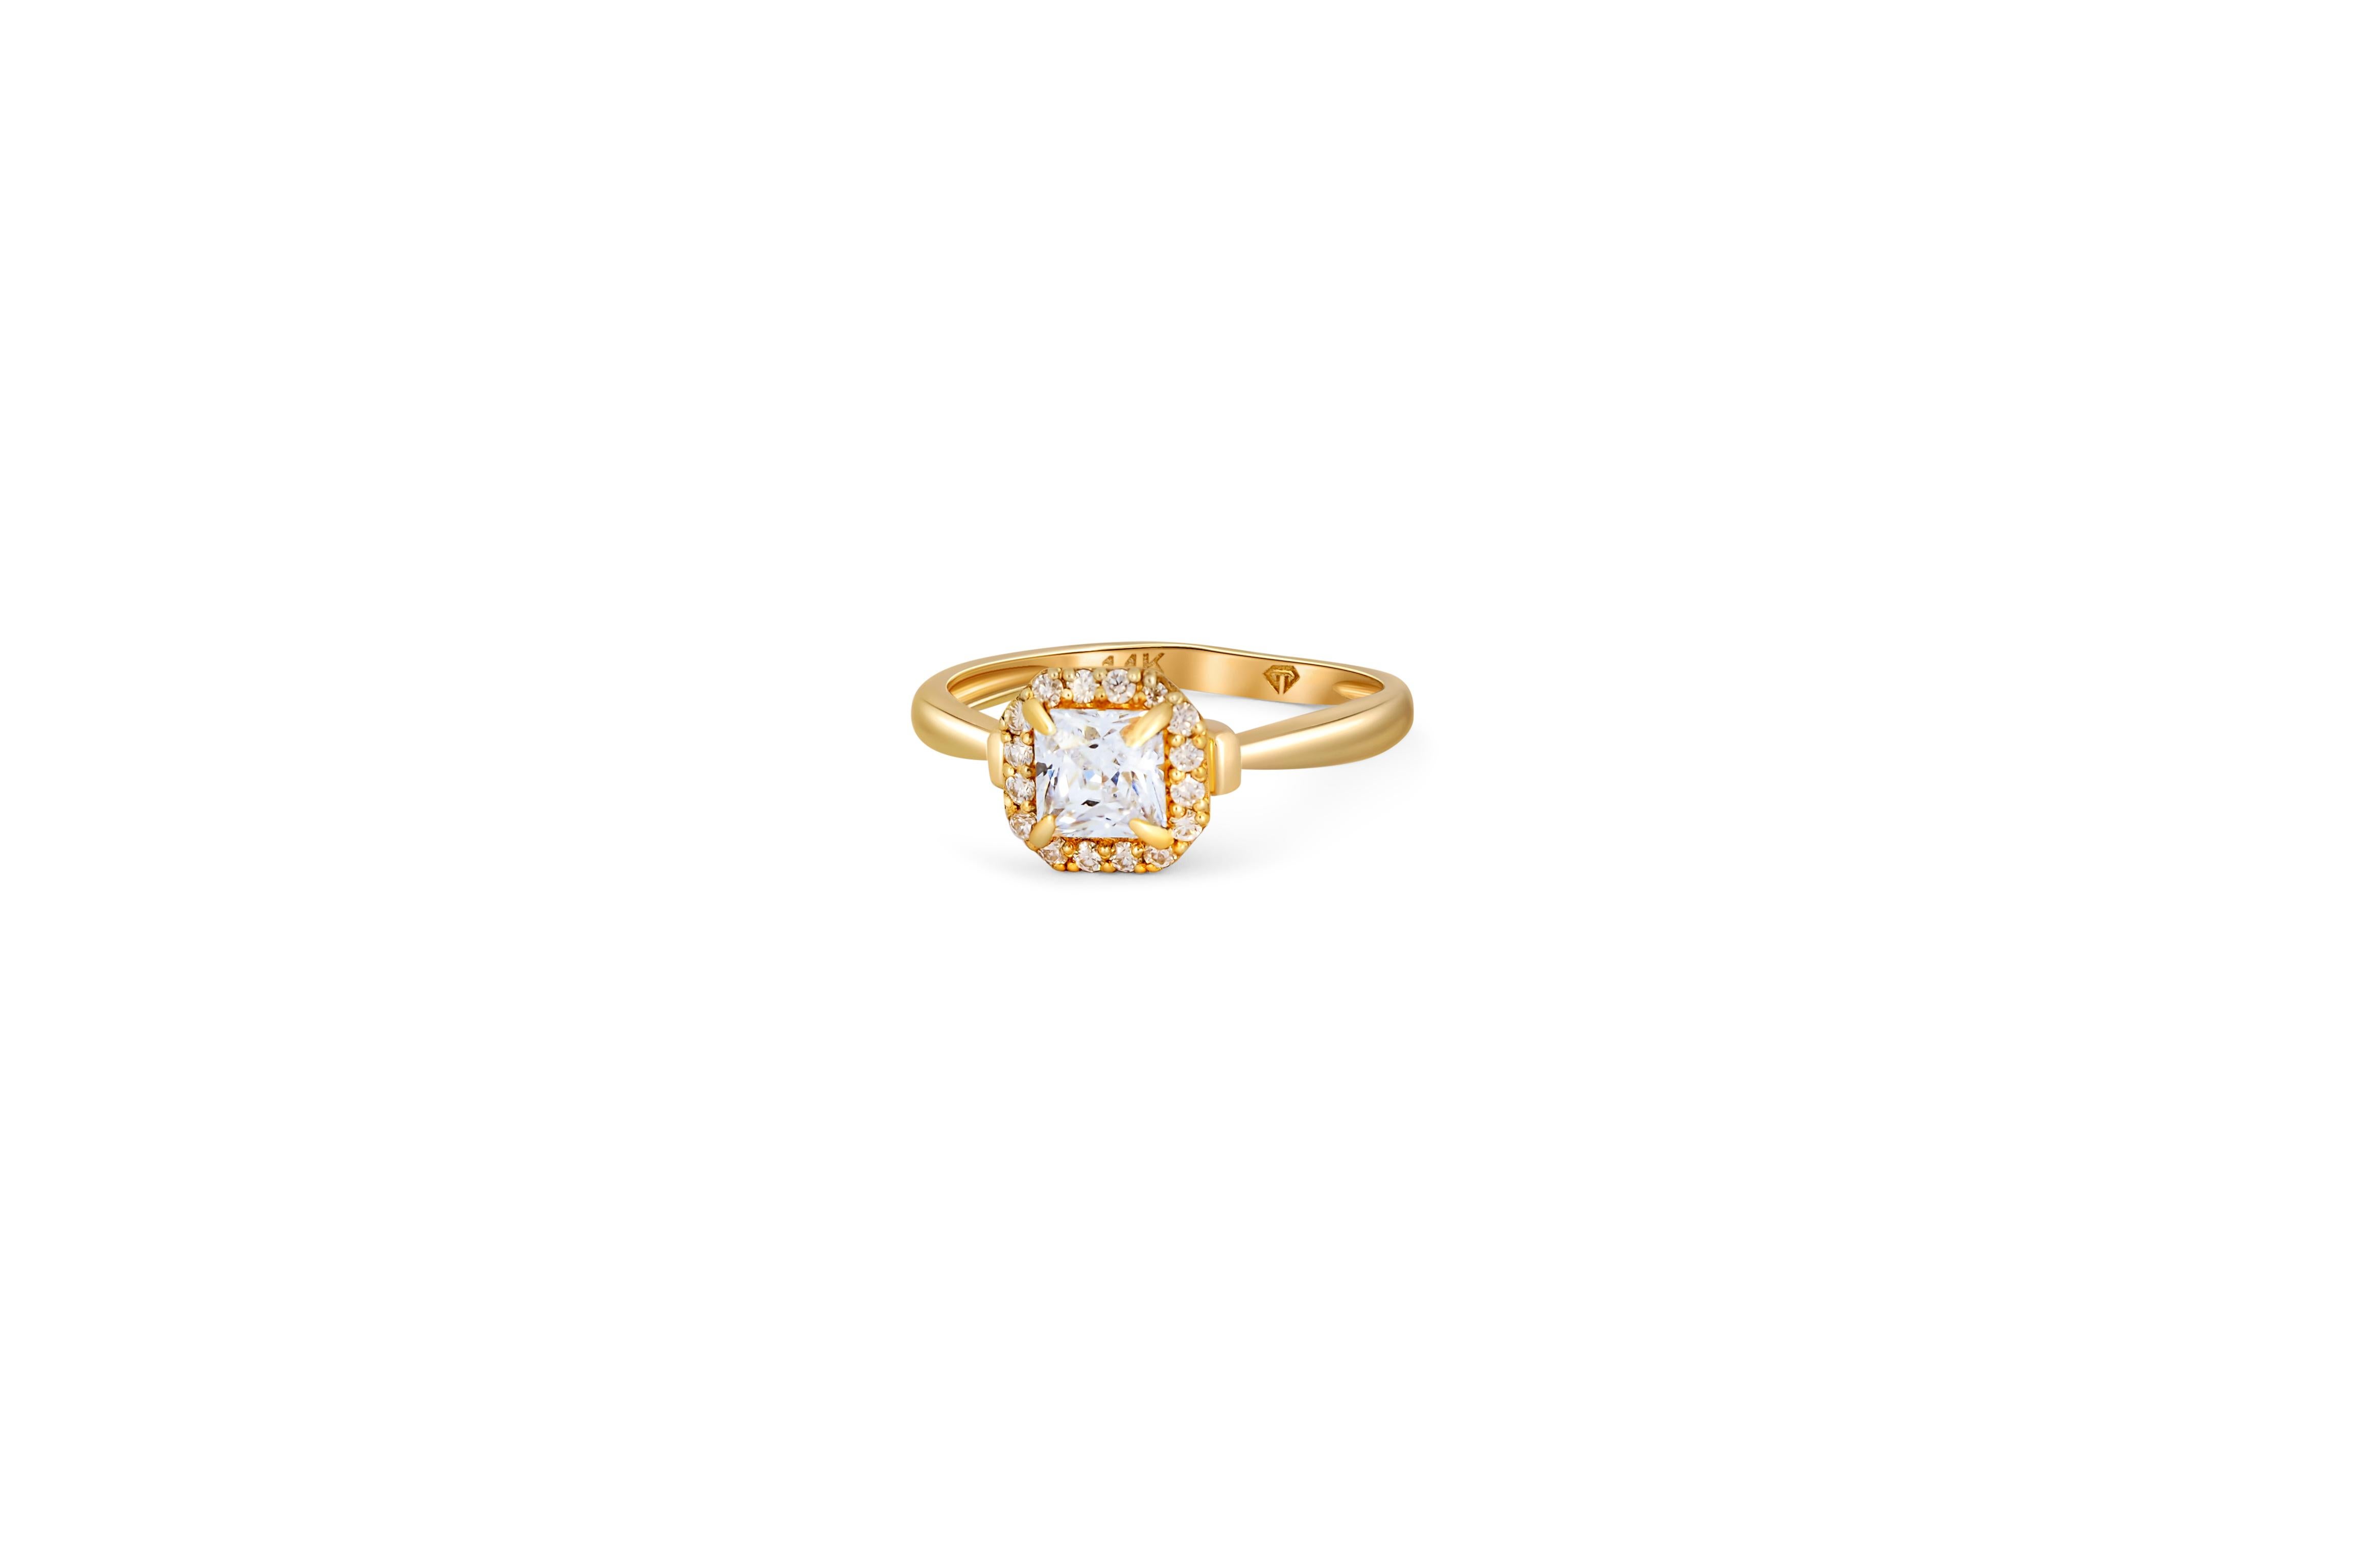 For Sale:  1 ct Princess cut moissanite 14k gold ring.  2